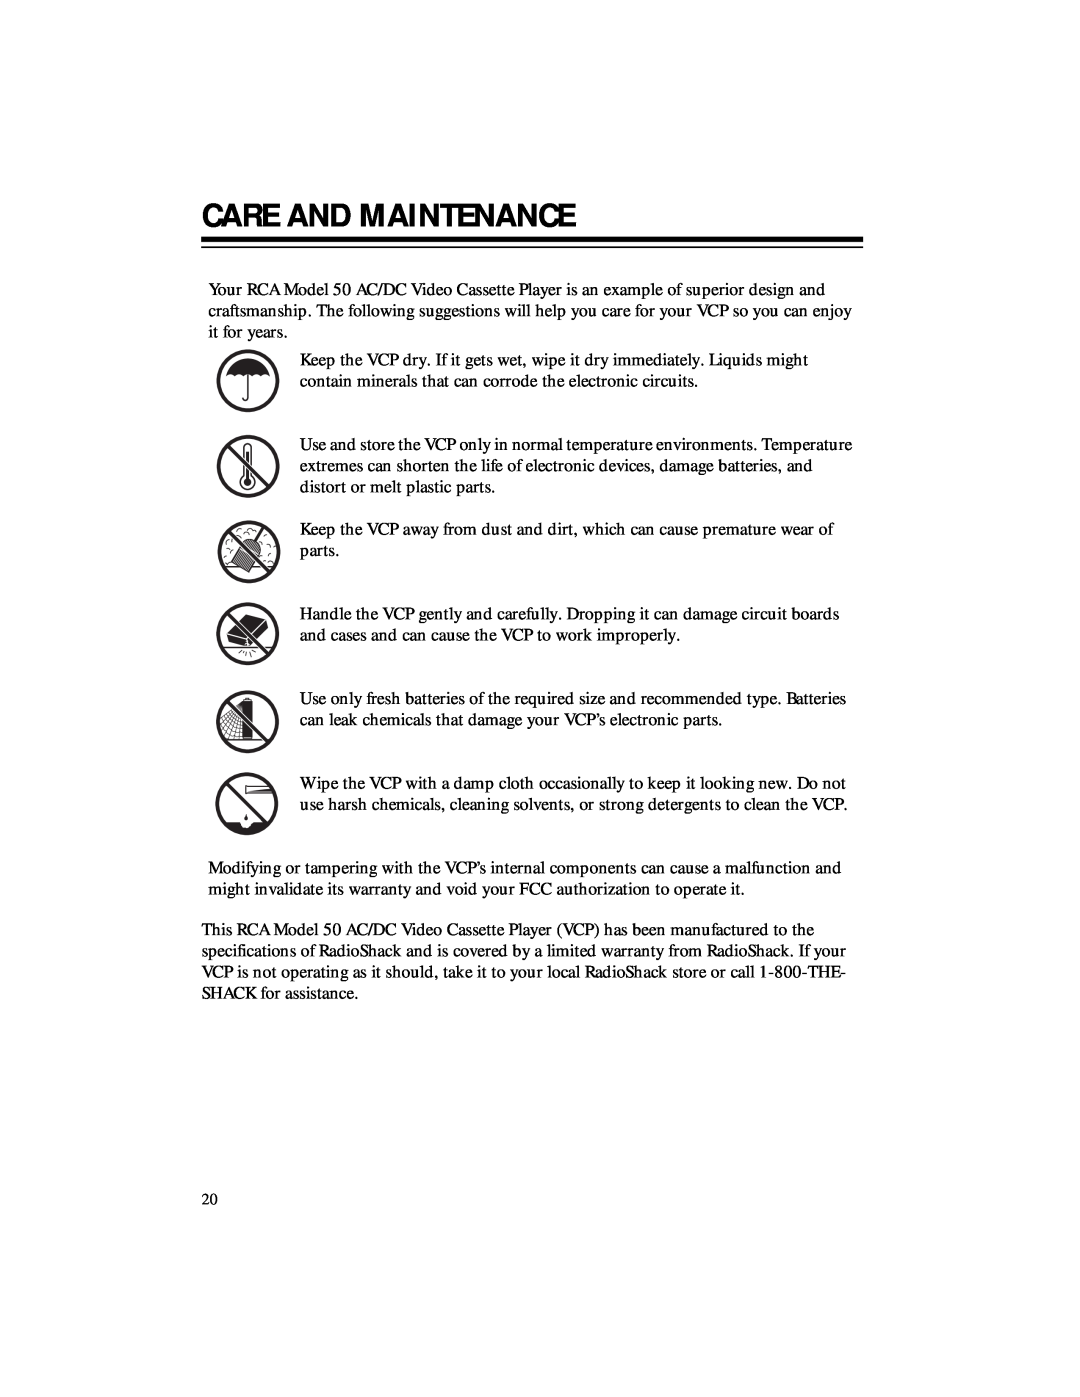 RCA 50, 40 owner manual Care And Maintenance 